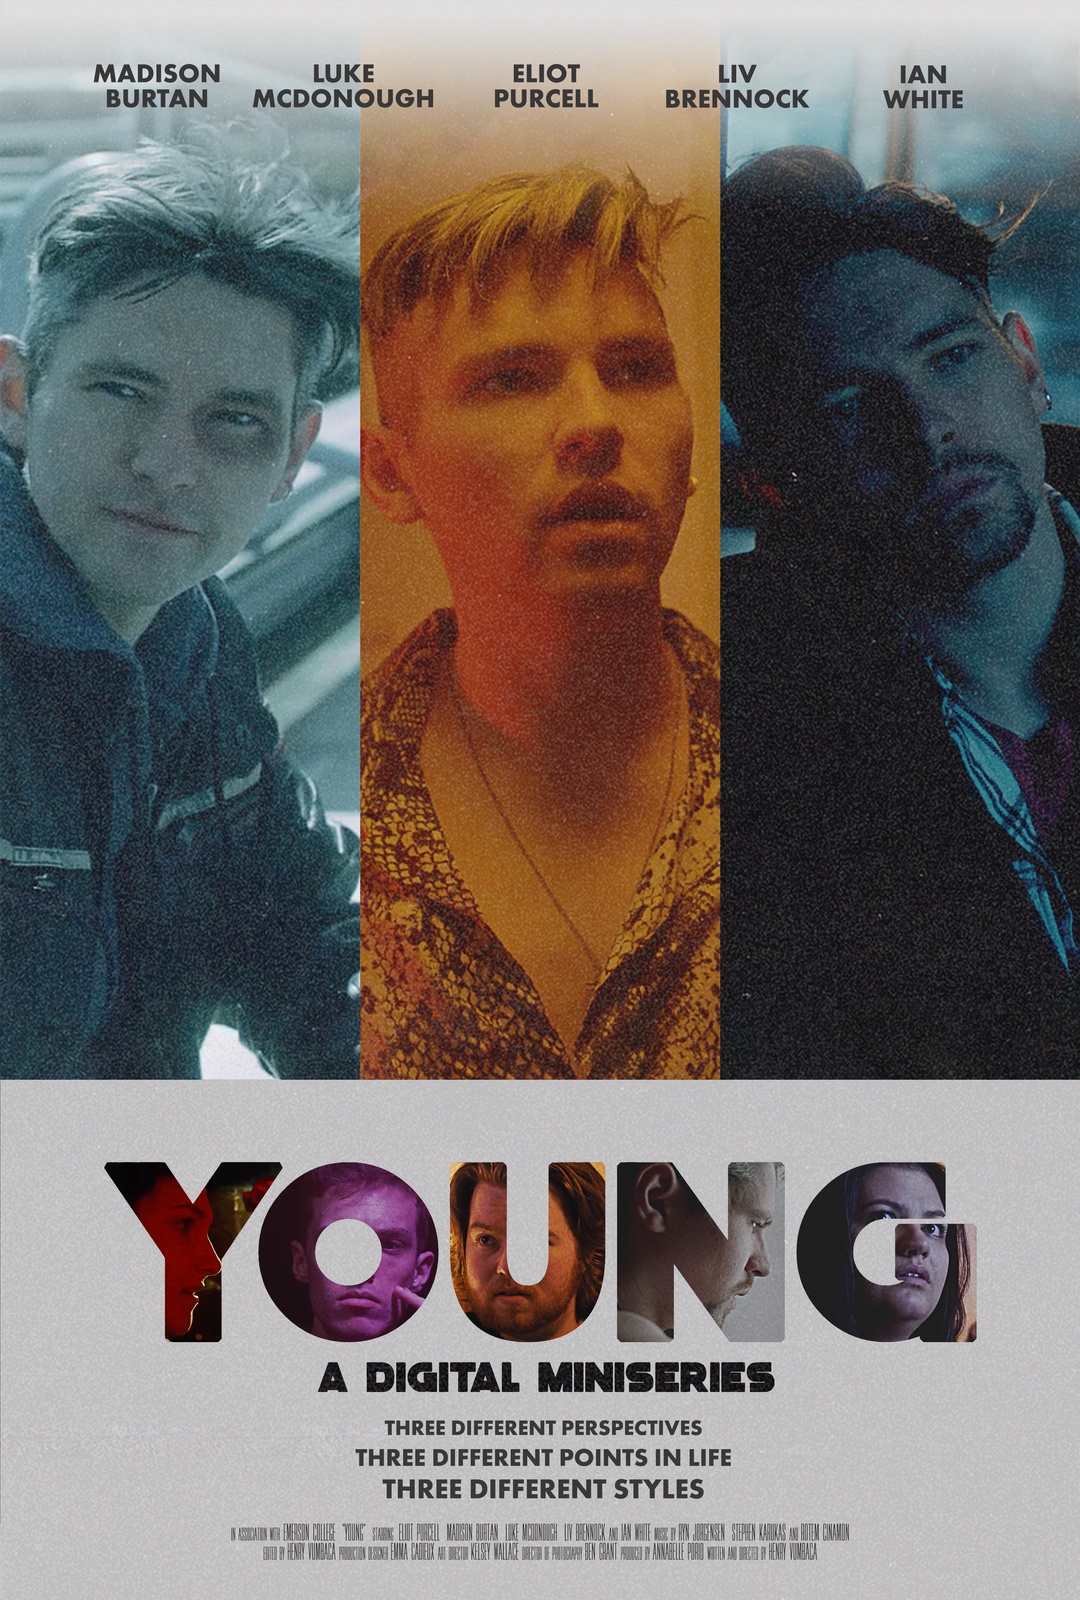 Young, a Digital Miniseries